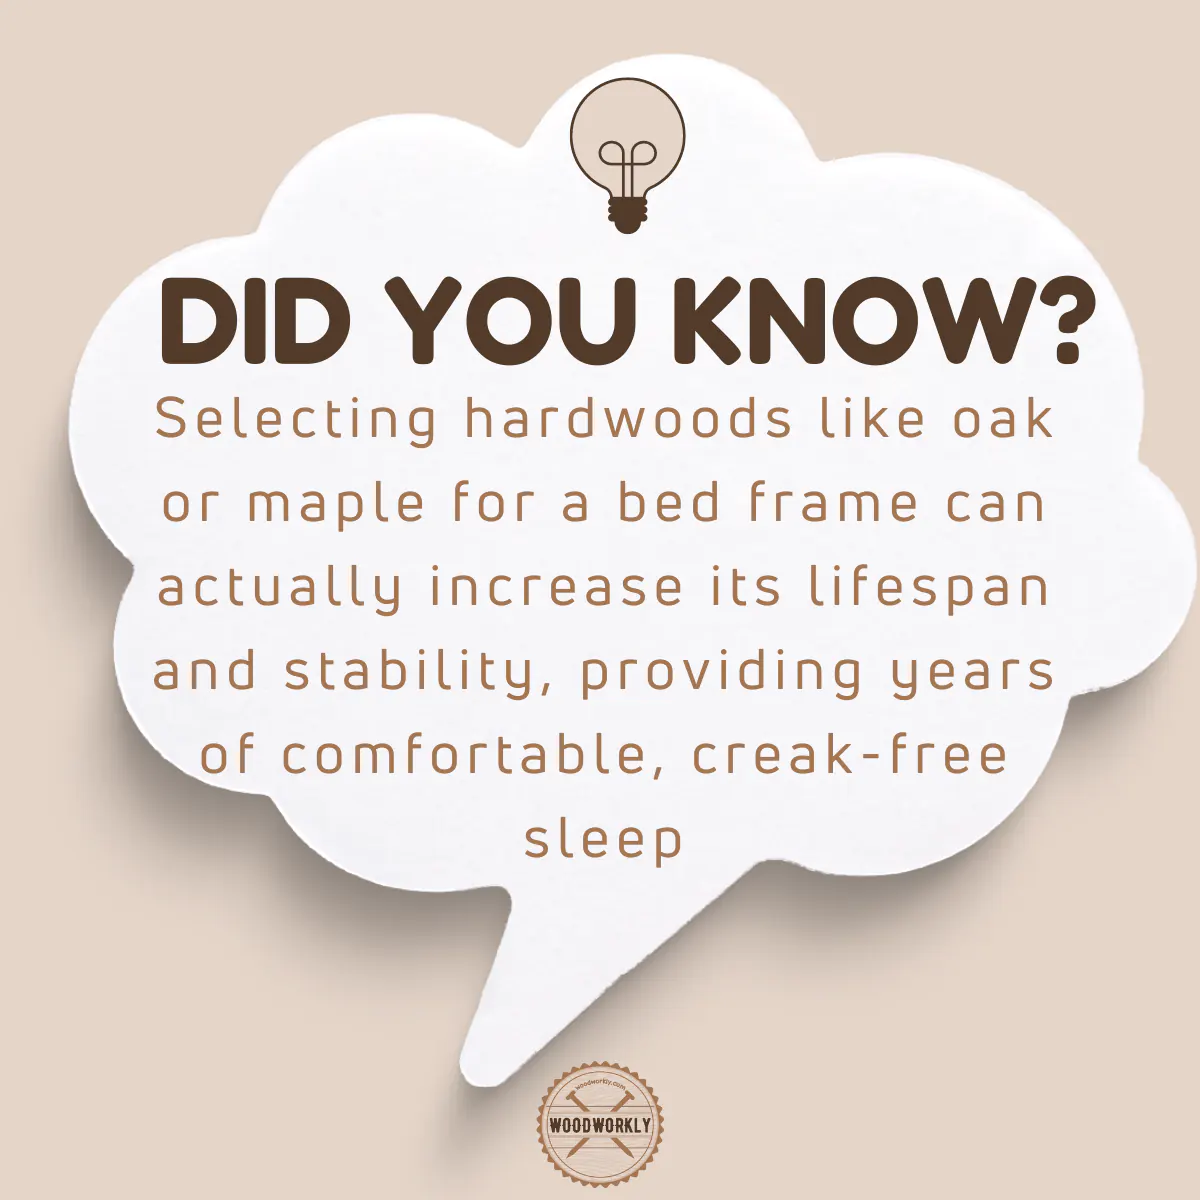 Did you know fact about selecting wood for bed frames